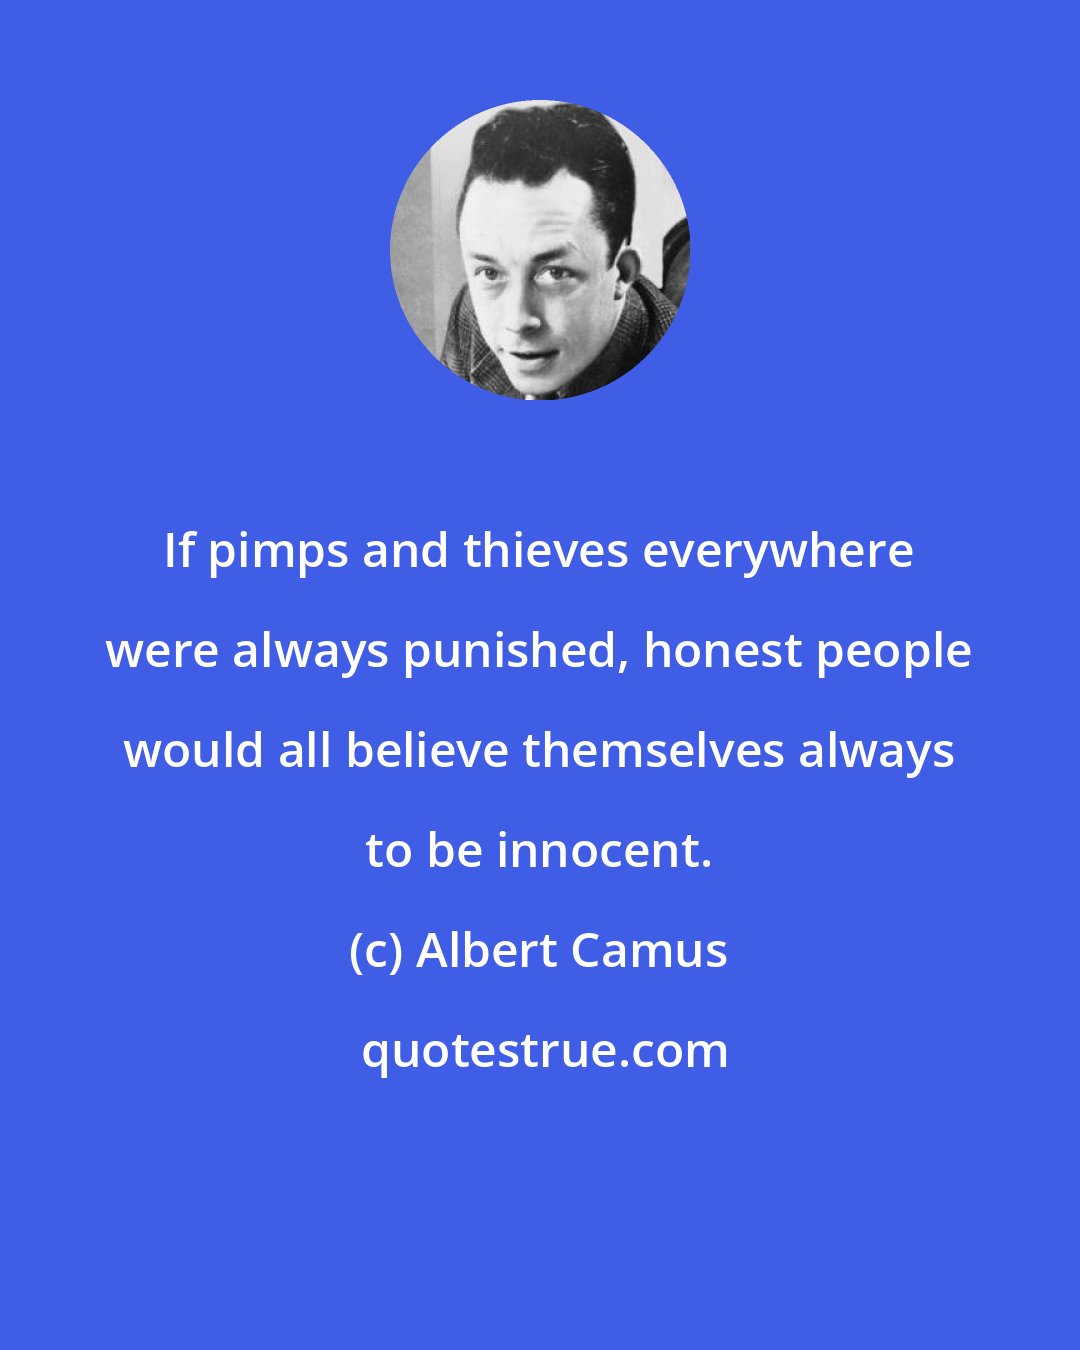 Albert Camus: If pimps and thieves everywhere were always punished, honest people would all believe themselves always to be innocent.